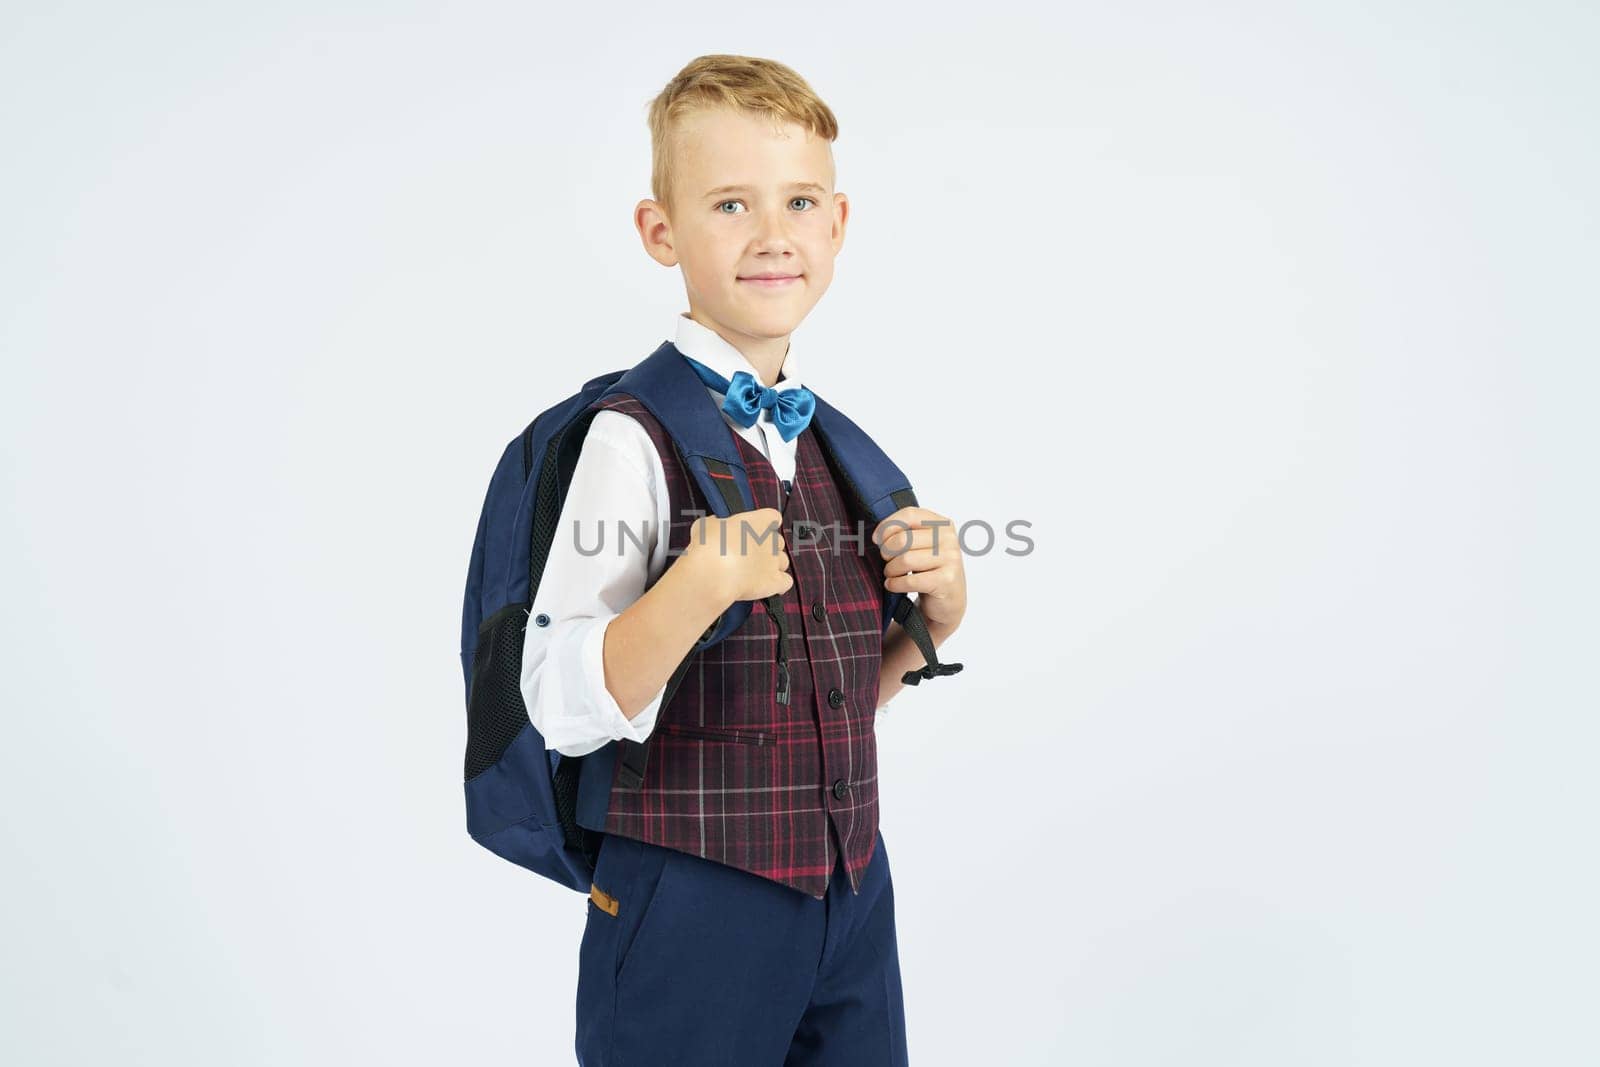 A schoolboy holds a school backpack, stands sideways, looks at the camera. by Sd28DimoN_1976